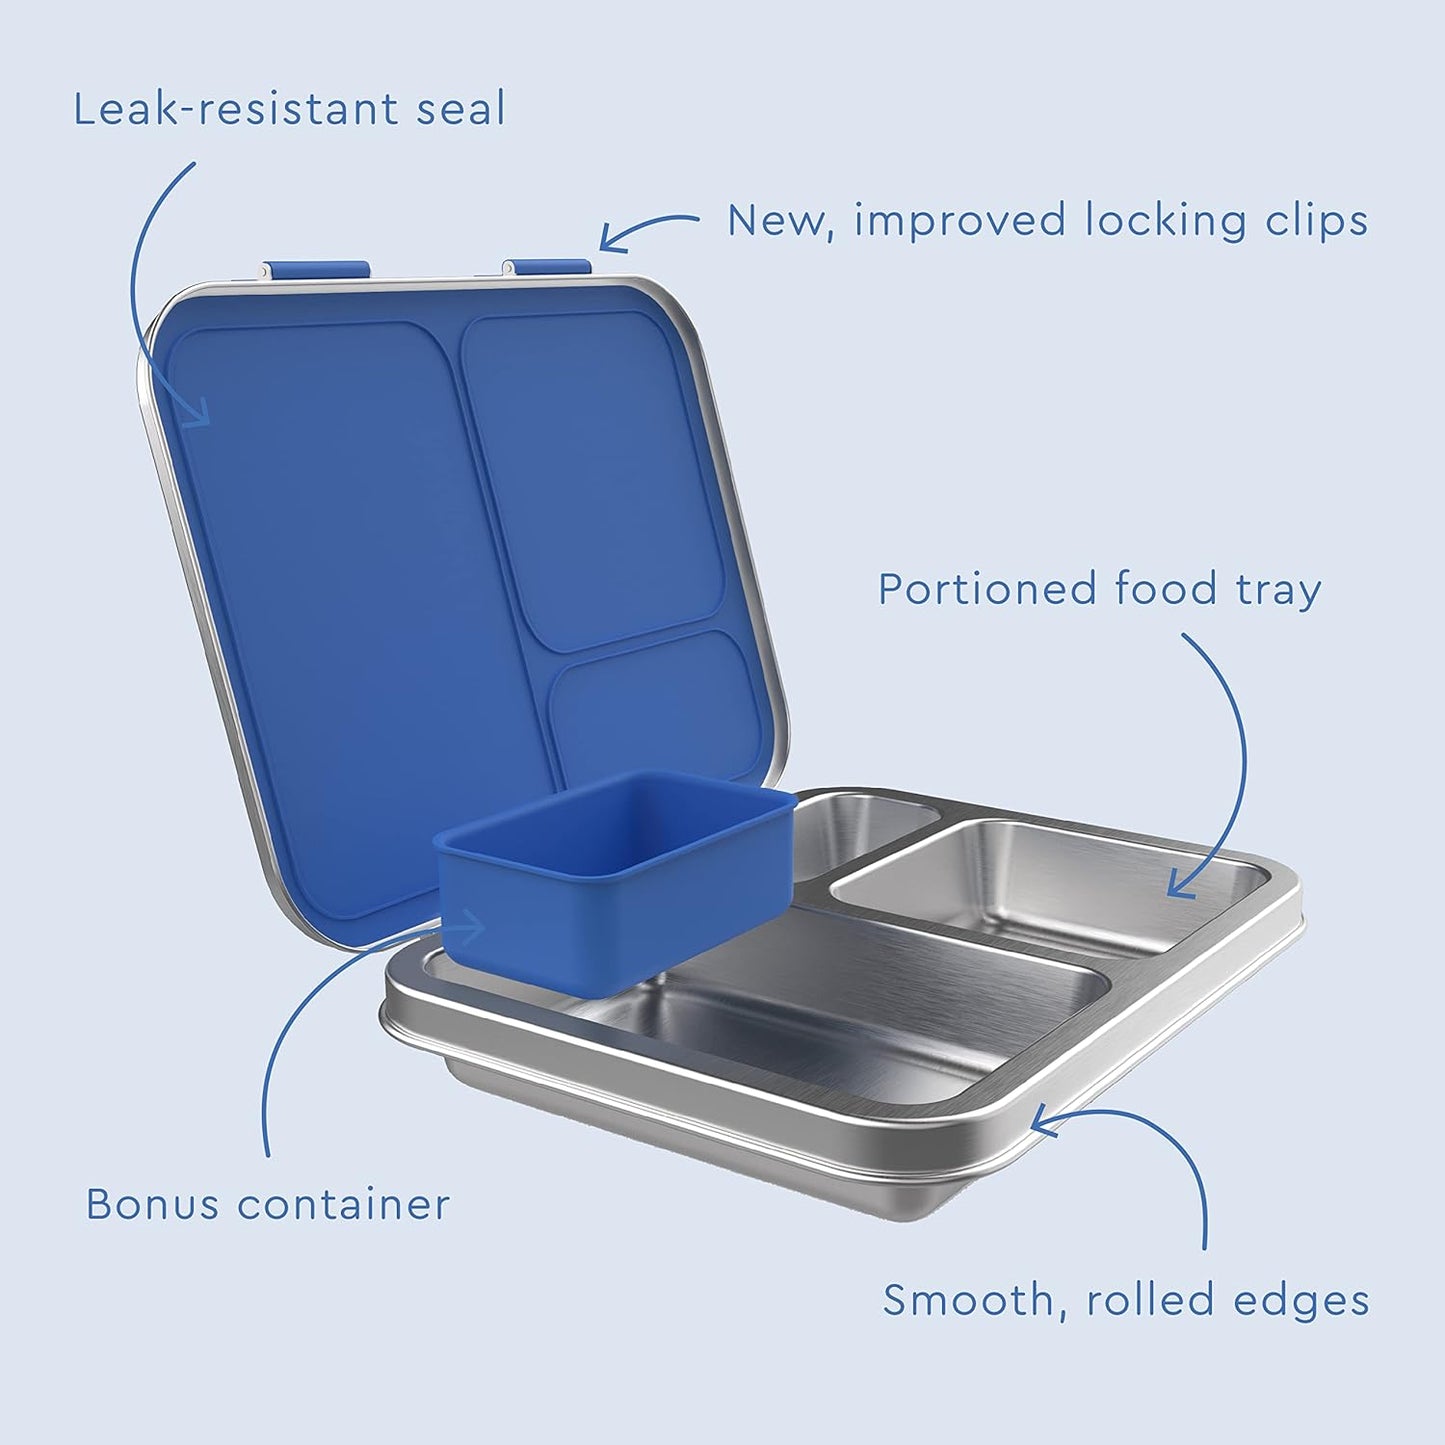 ® Kids Stainless Steel Leak-Resistant Lunch Box - Bento-Style Redesigned in 2022 W/Upgraded Latches, 3 Compartments, & Extra Container - Eco-Friendly, Dishwasher Safe, Patented Design (Blue)